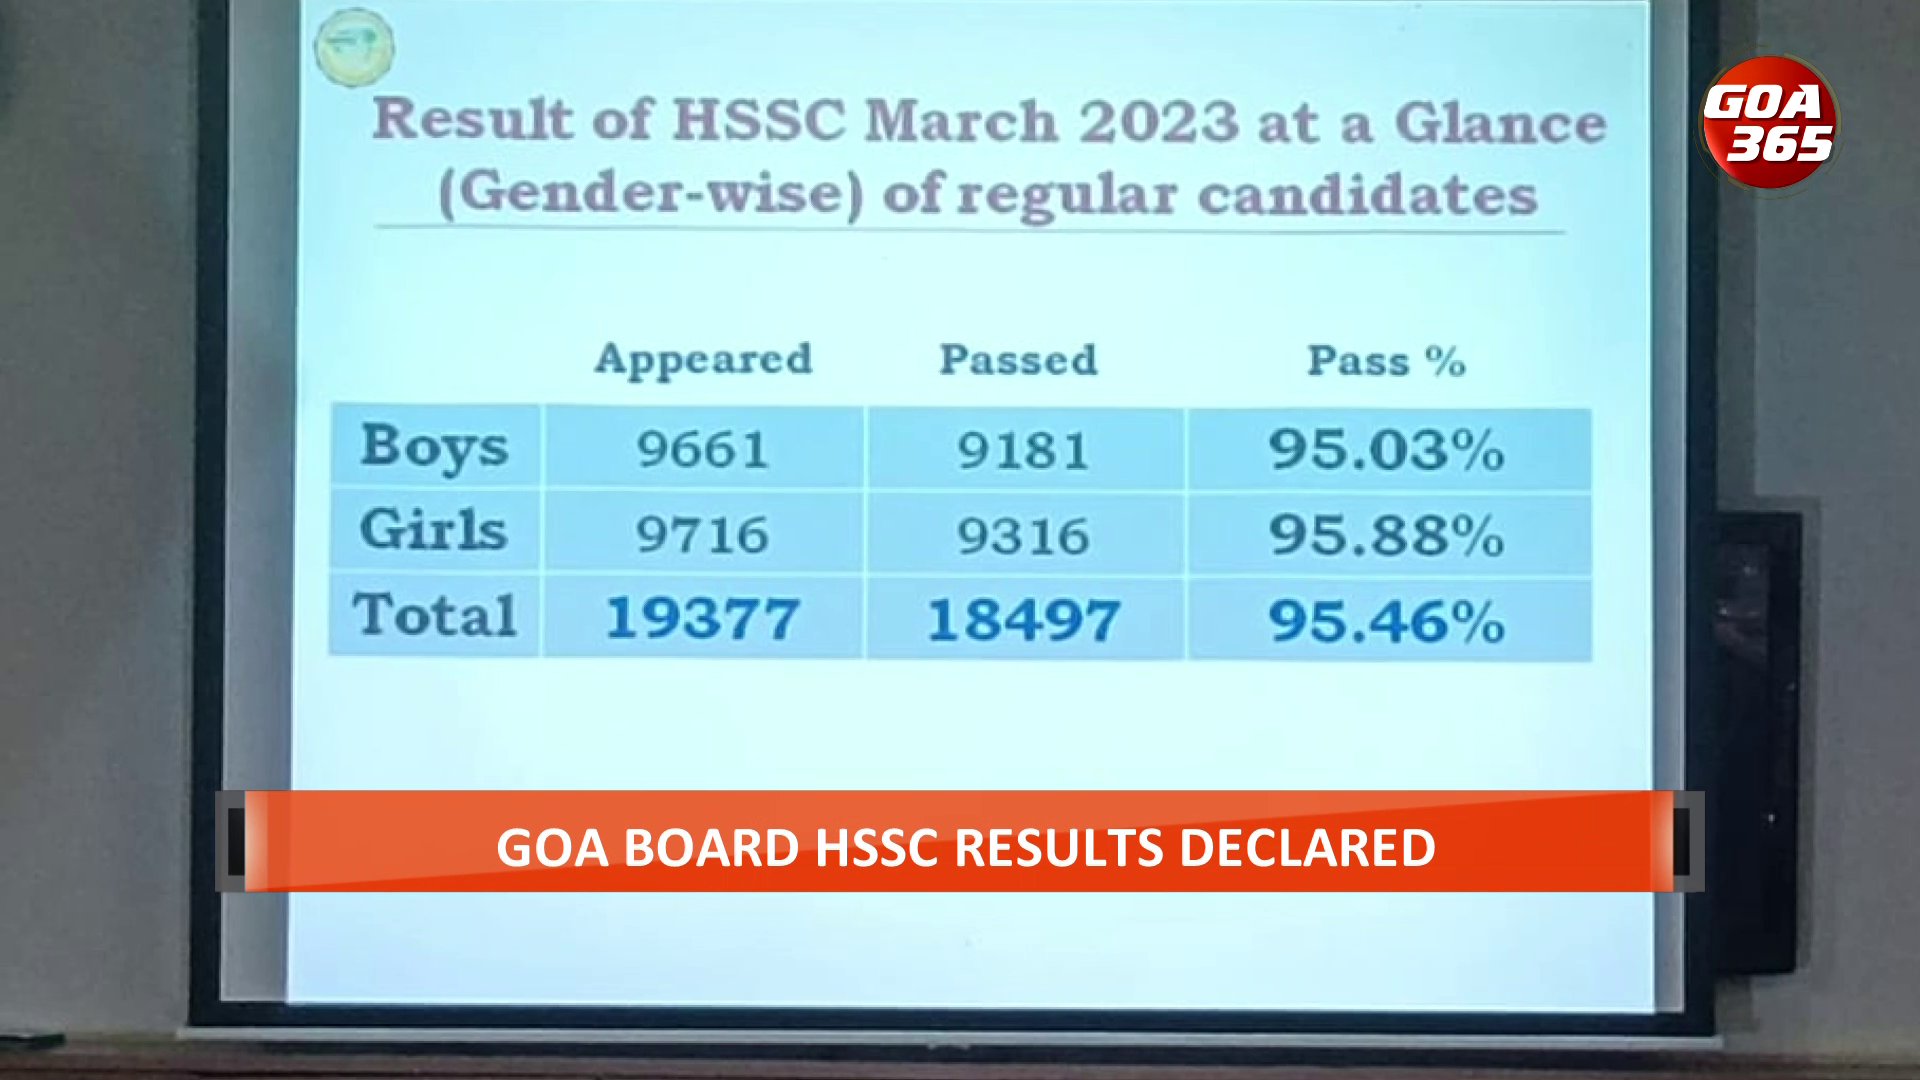 Goa Board HSSC results declared: overall pass percentage at 95.46% || ENGLISH || GOA365